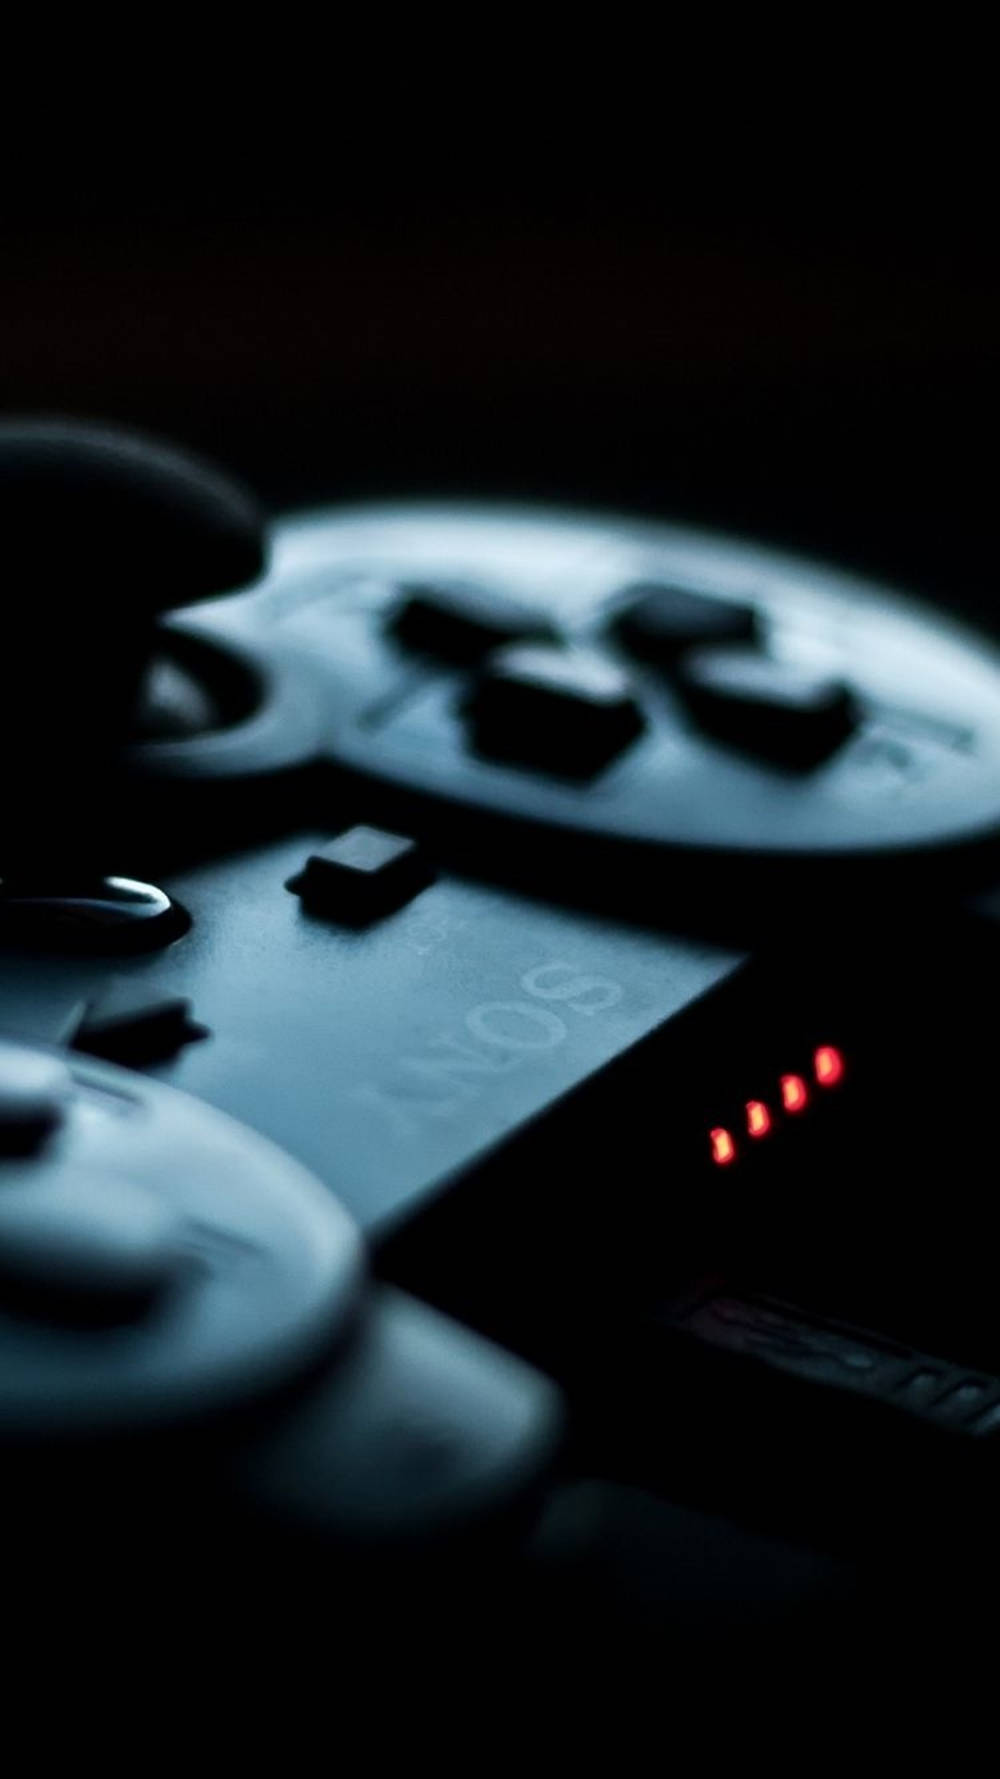 Immersive iPhone Gaming with DualShock Controller Wallpaper